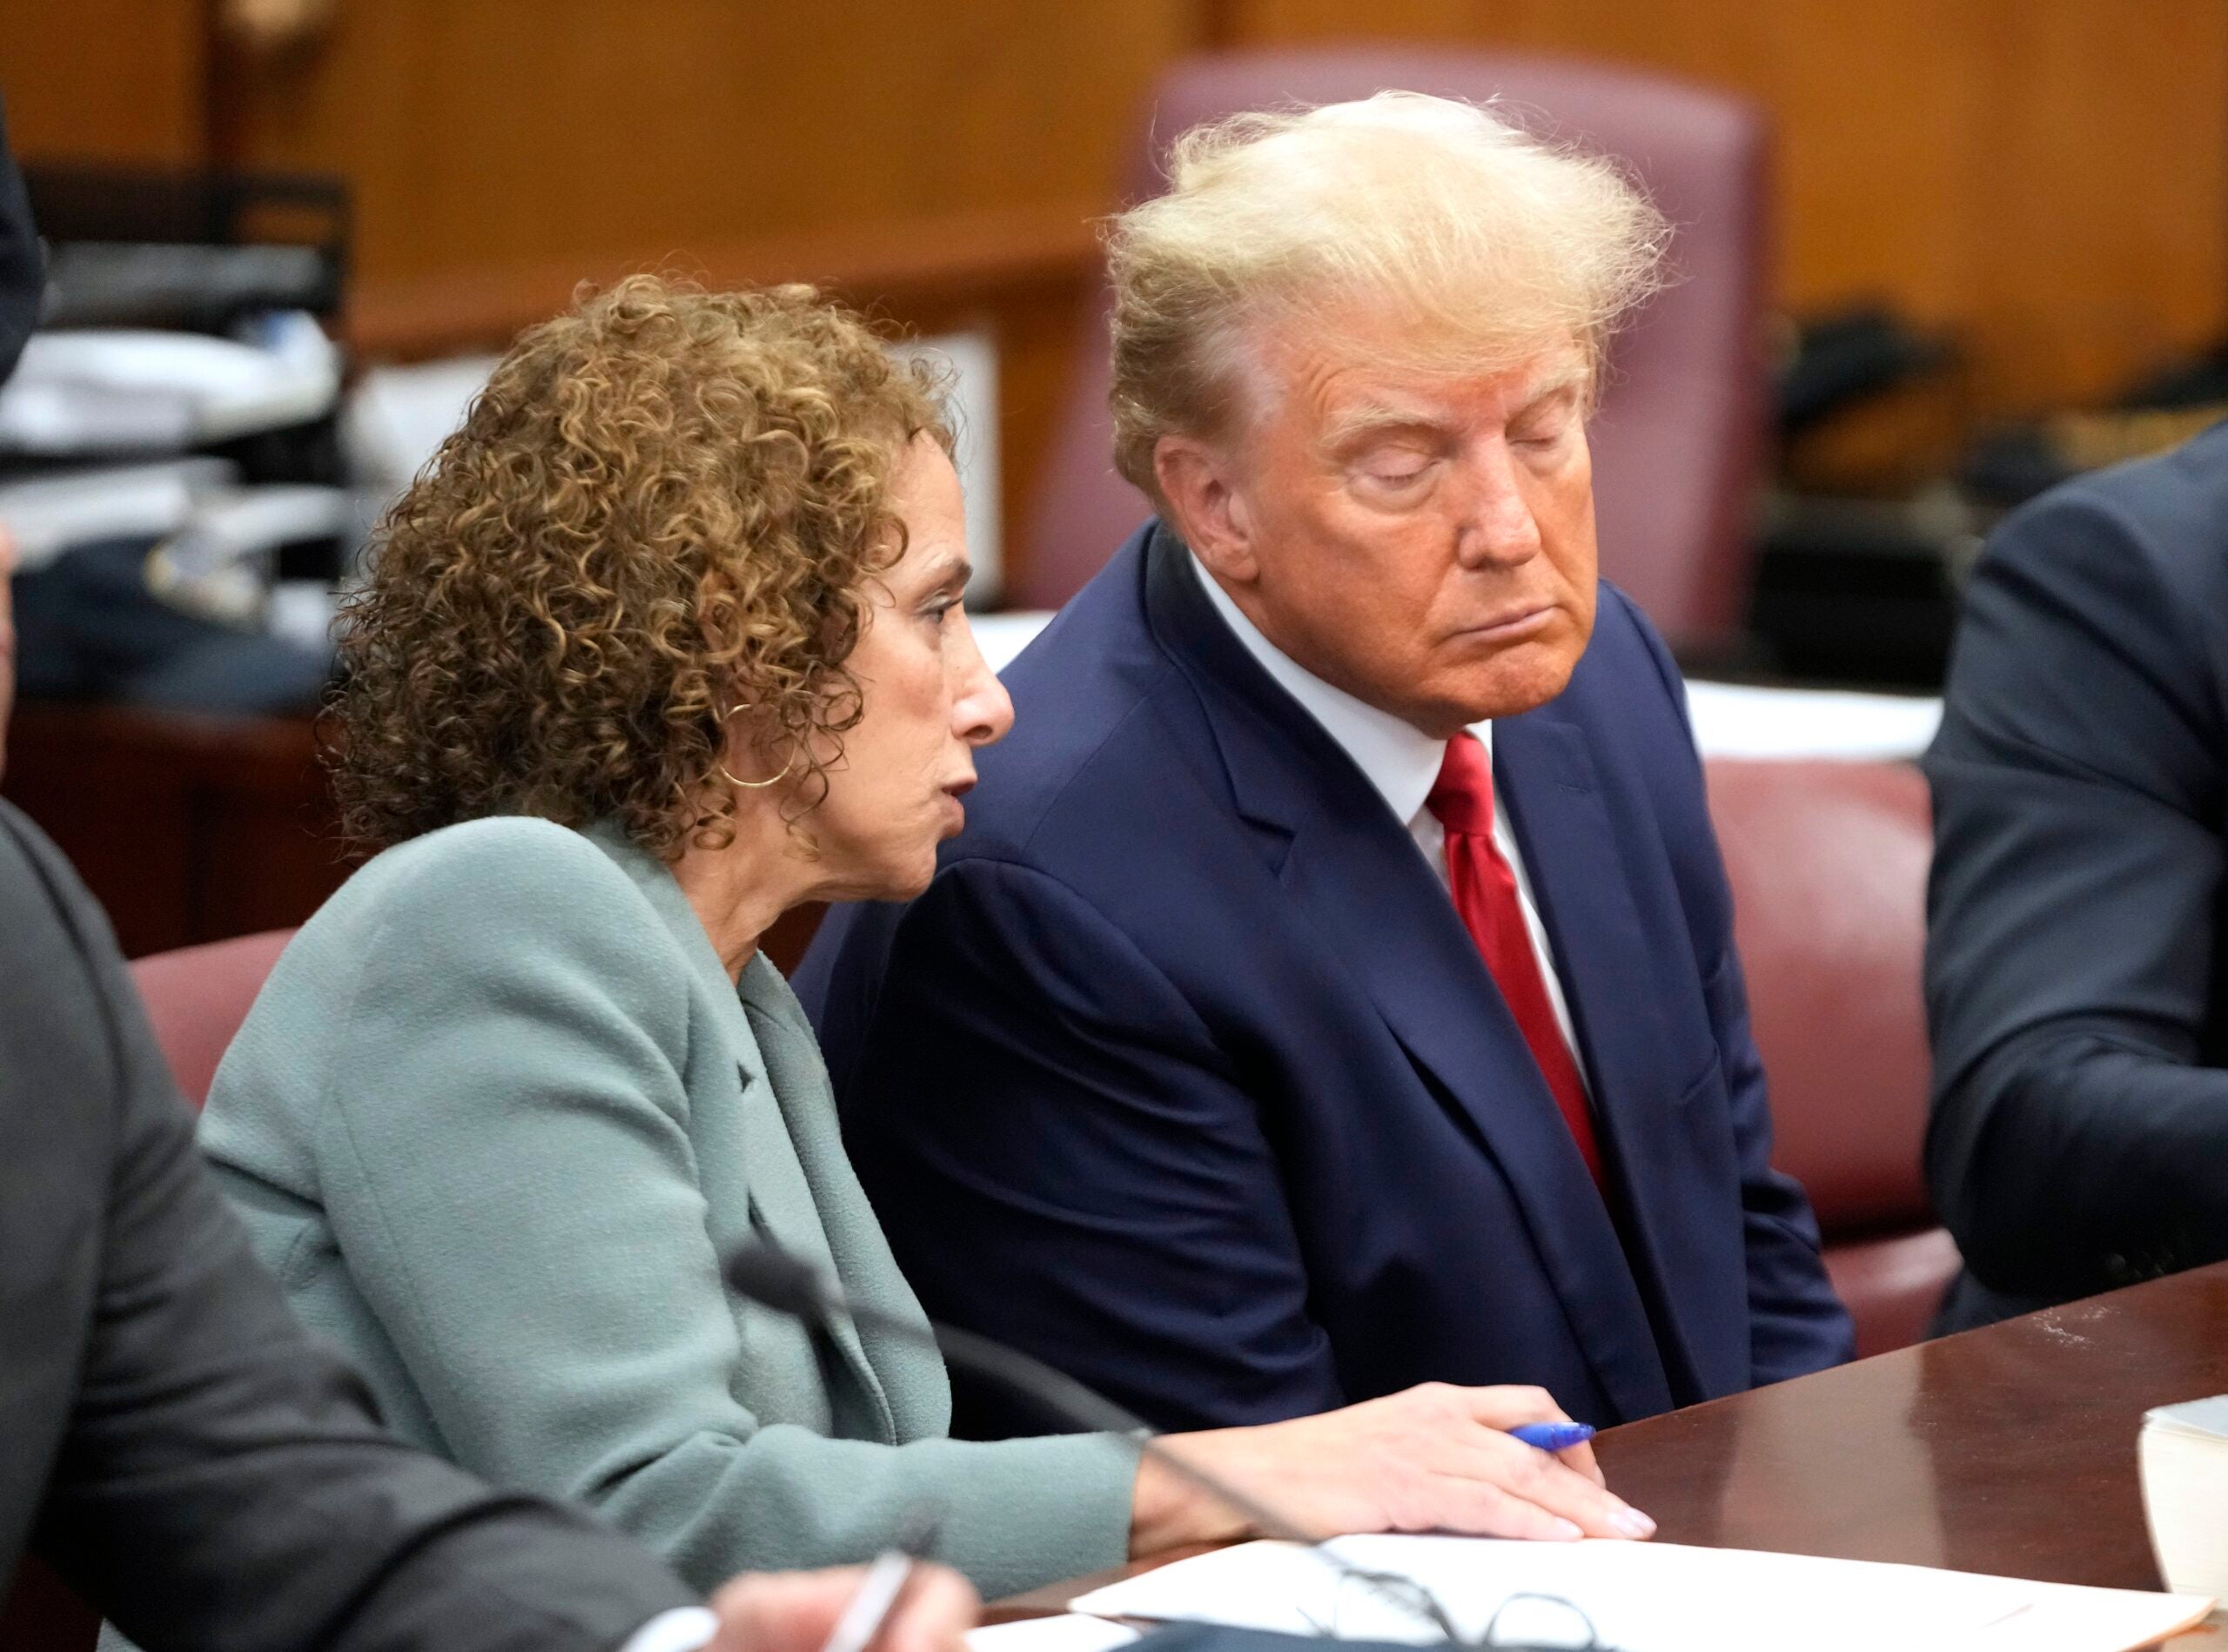 Trump - Former U.S. President Donald Trump (R) talks with one of his attorneys inside the courtroom